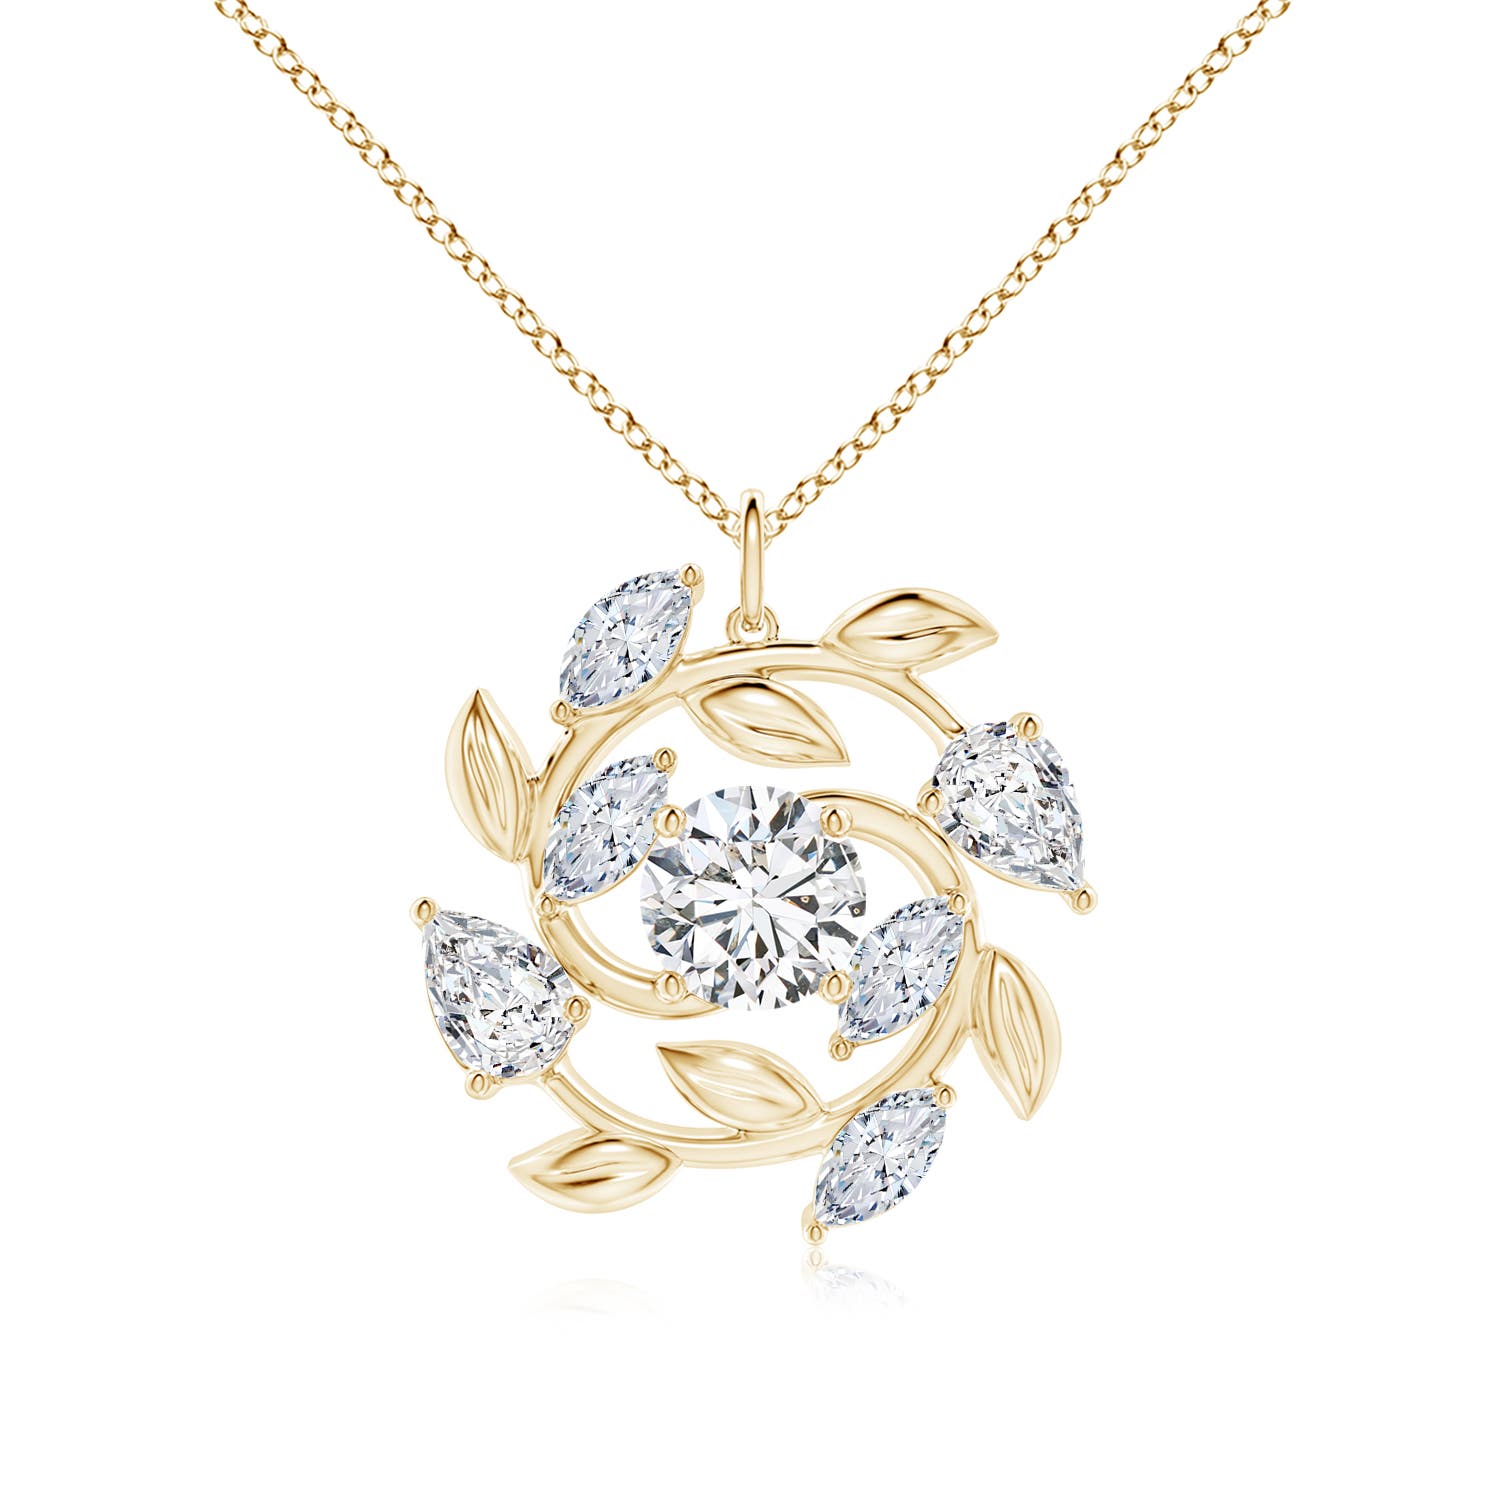 H, SI2 / 4.62 CT / 14 KT Yellow Gold